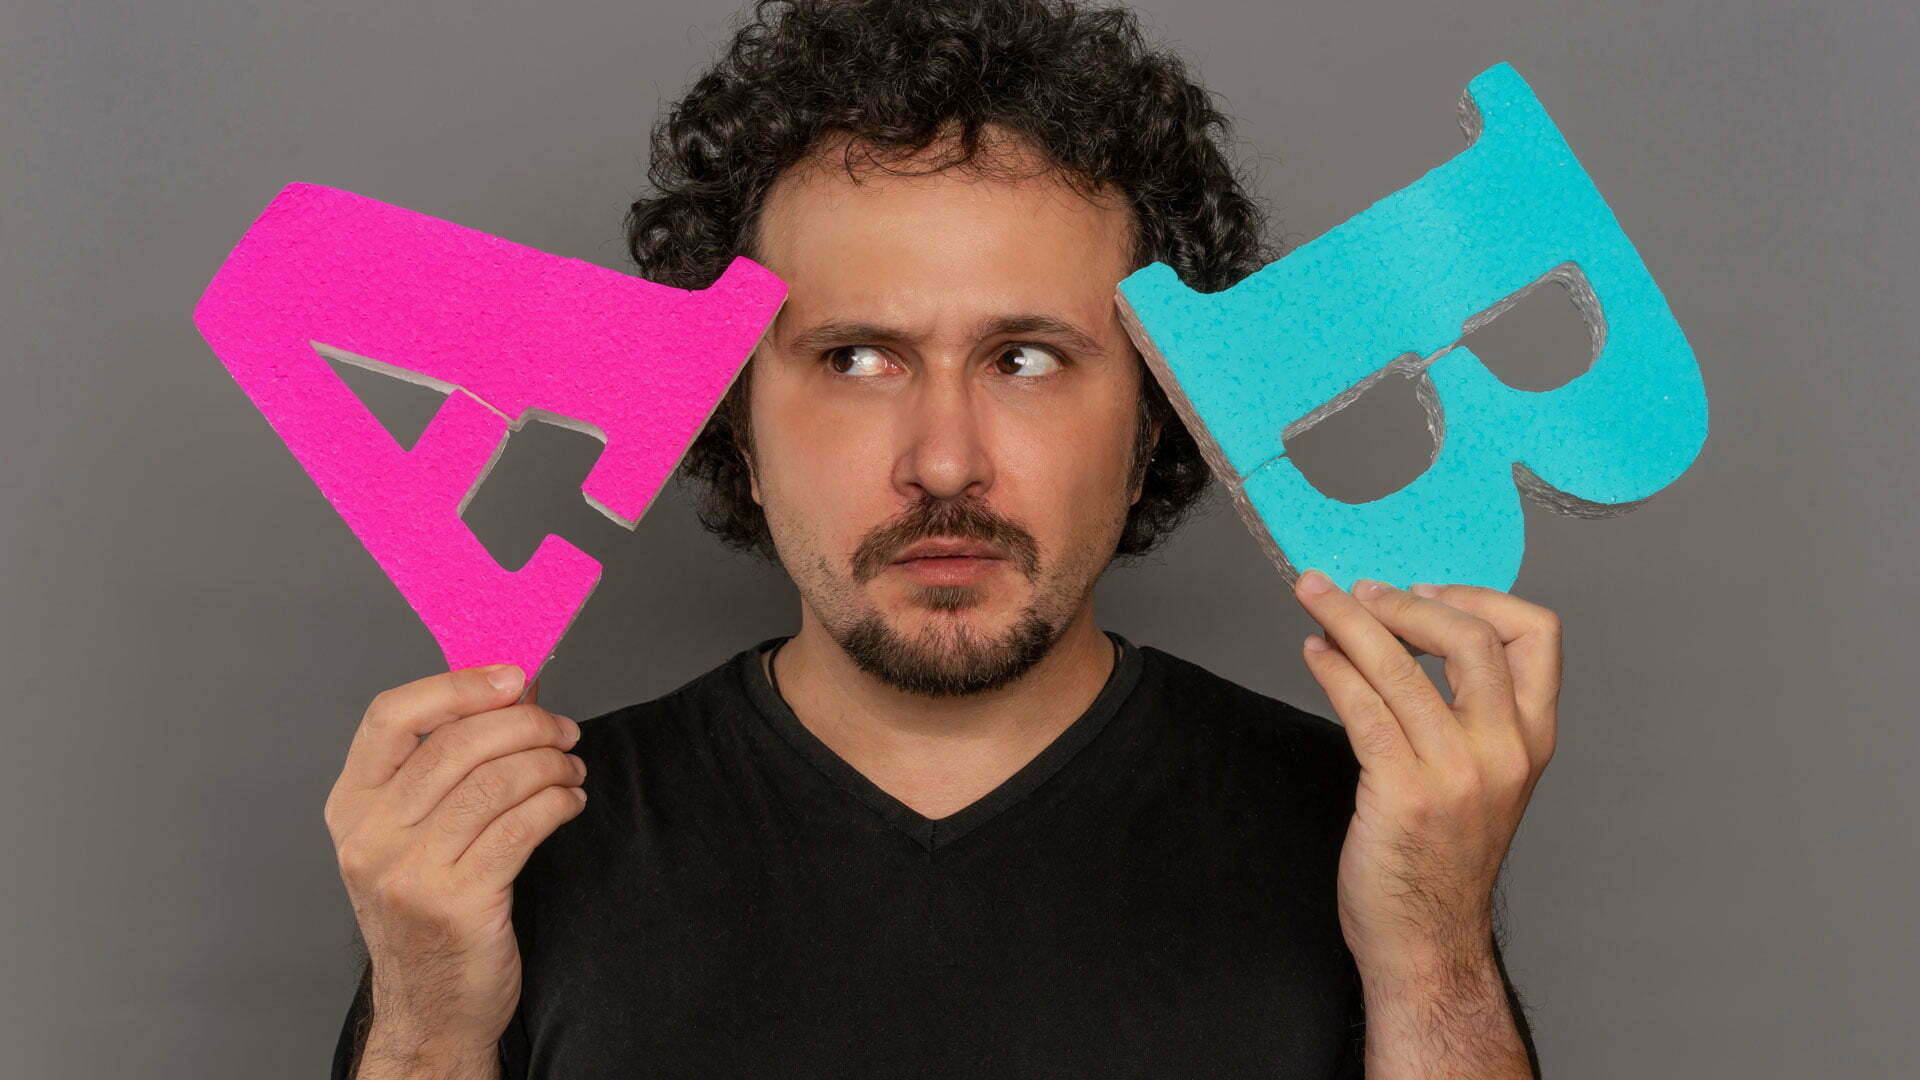 Man Holding 3D Letters 'A' and 'B' next to his head